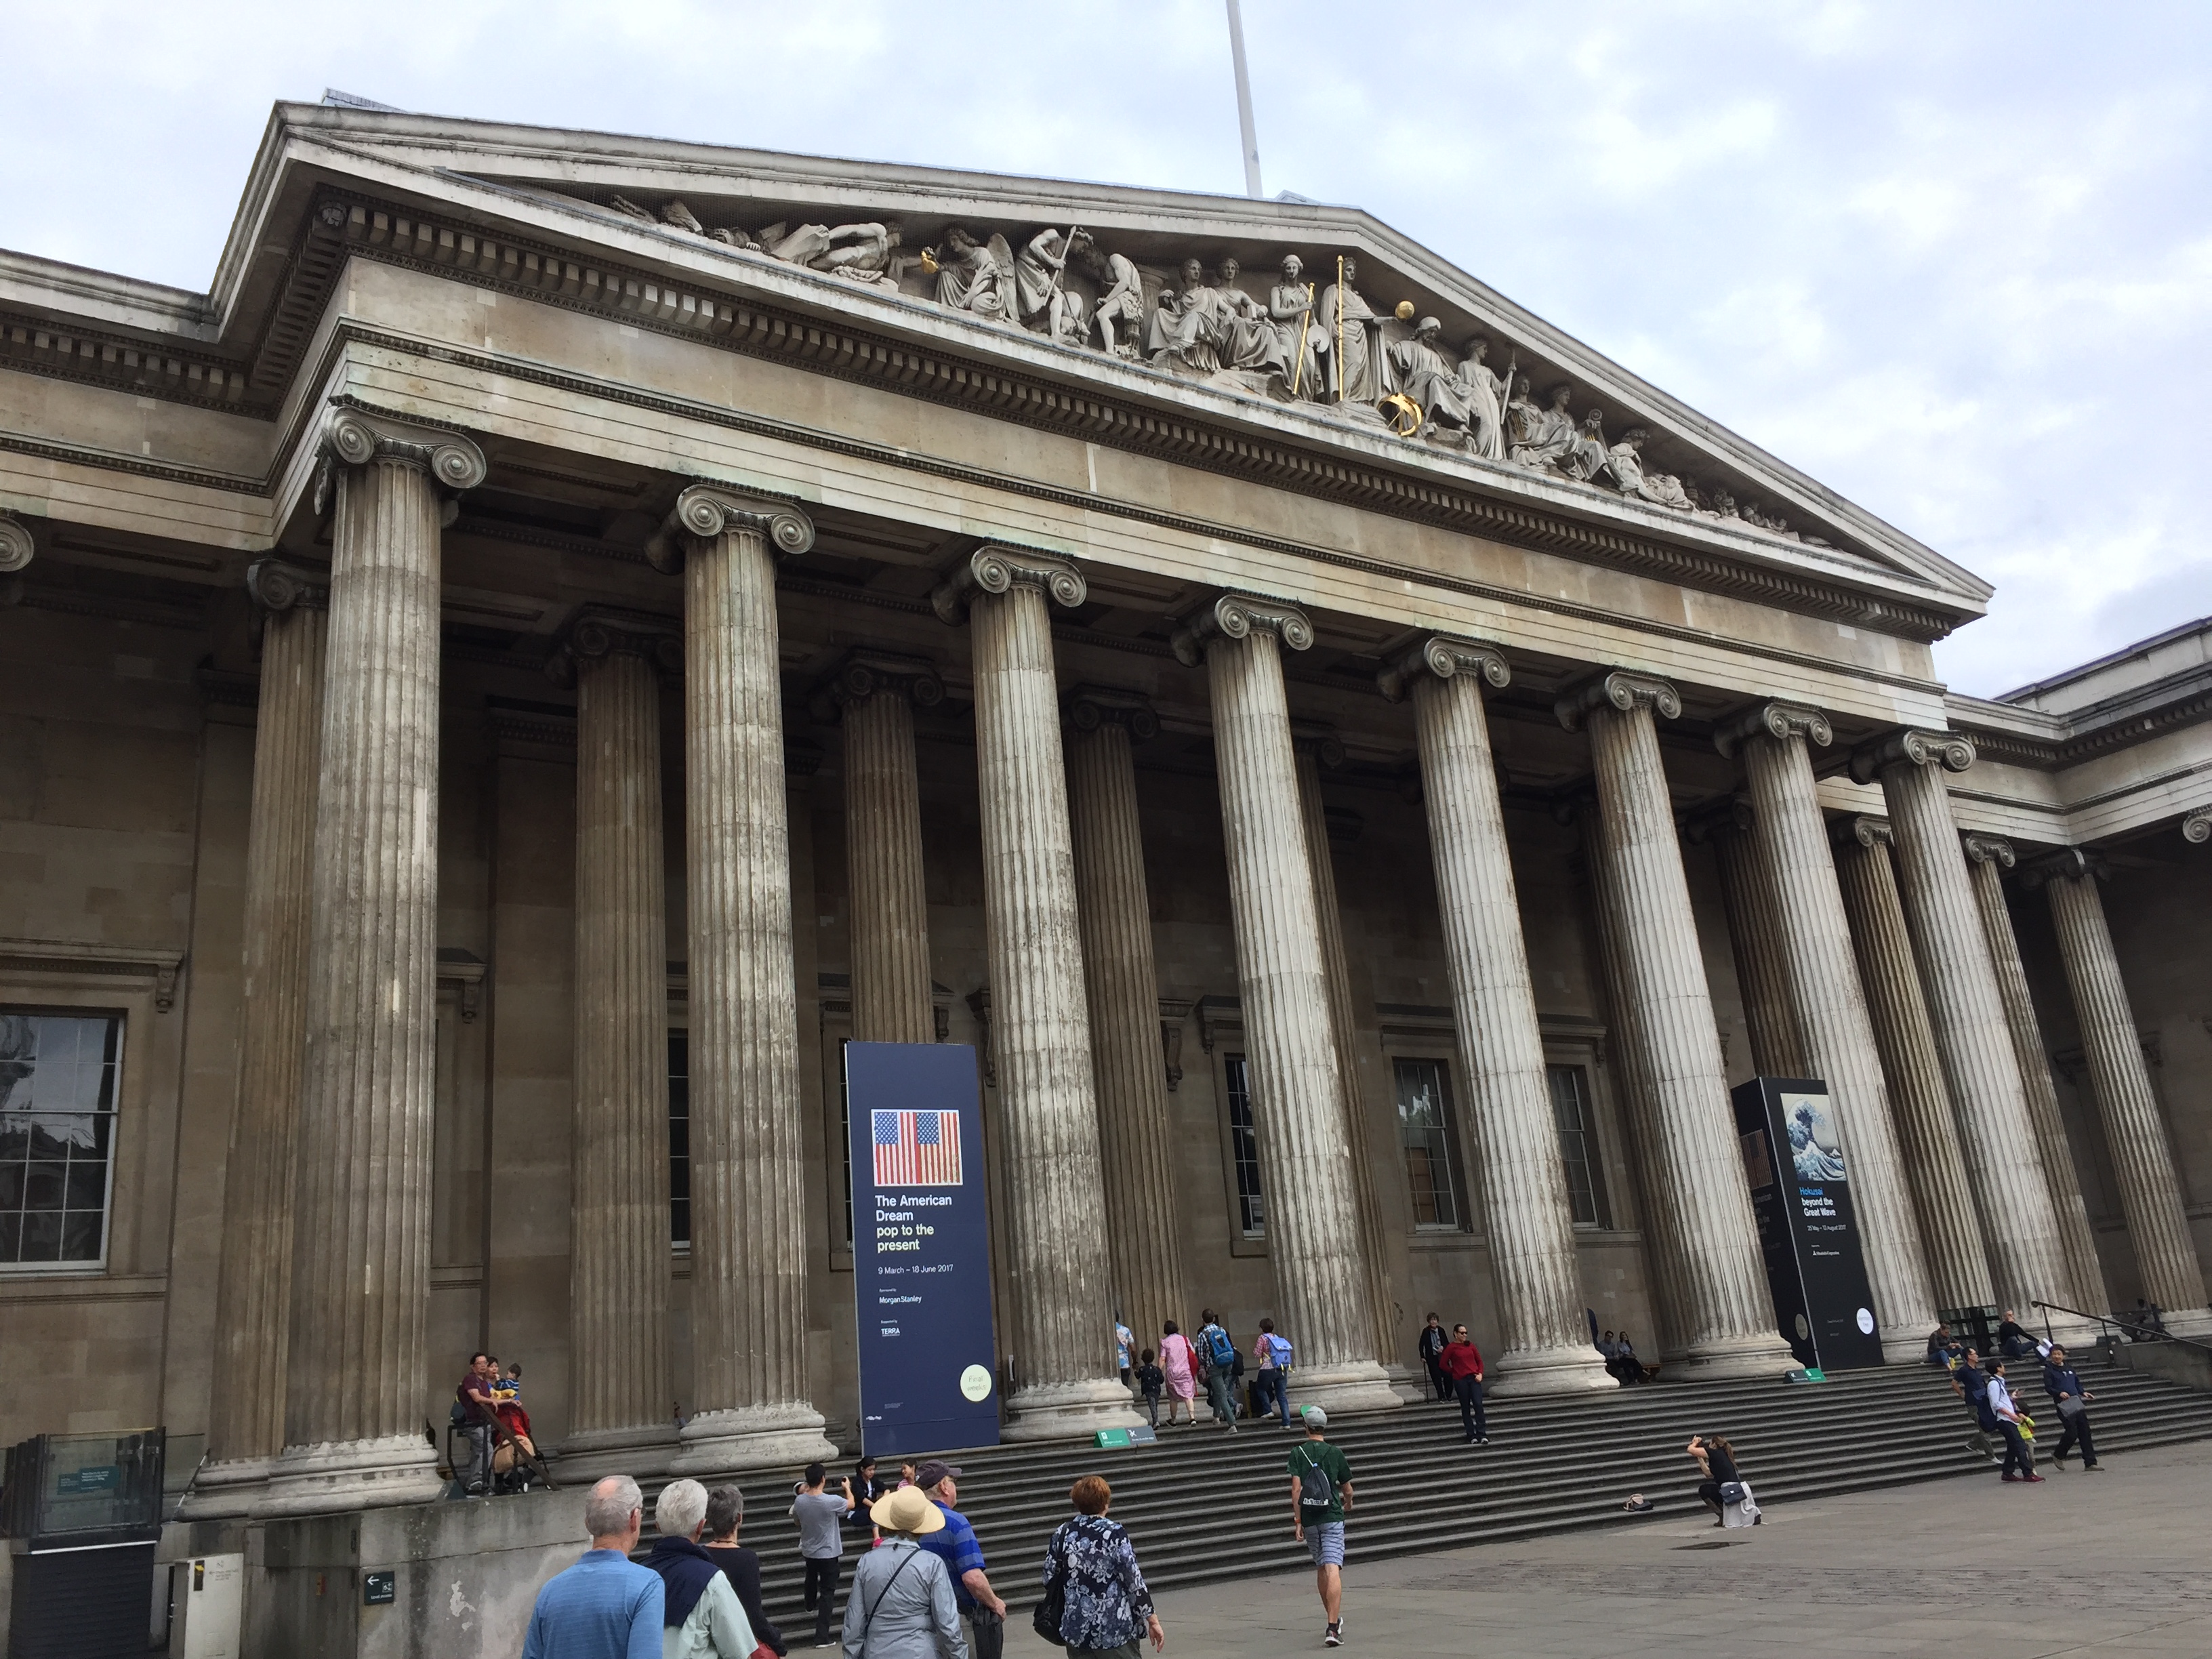 The entrance to the British Museum. At the top of the wide steps are 8 tall pillars, spaced along the width of the steps, above which is a triangular roof section containing various carved figures.